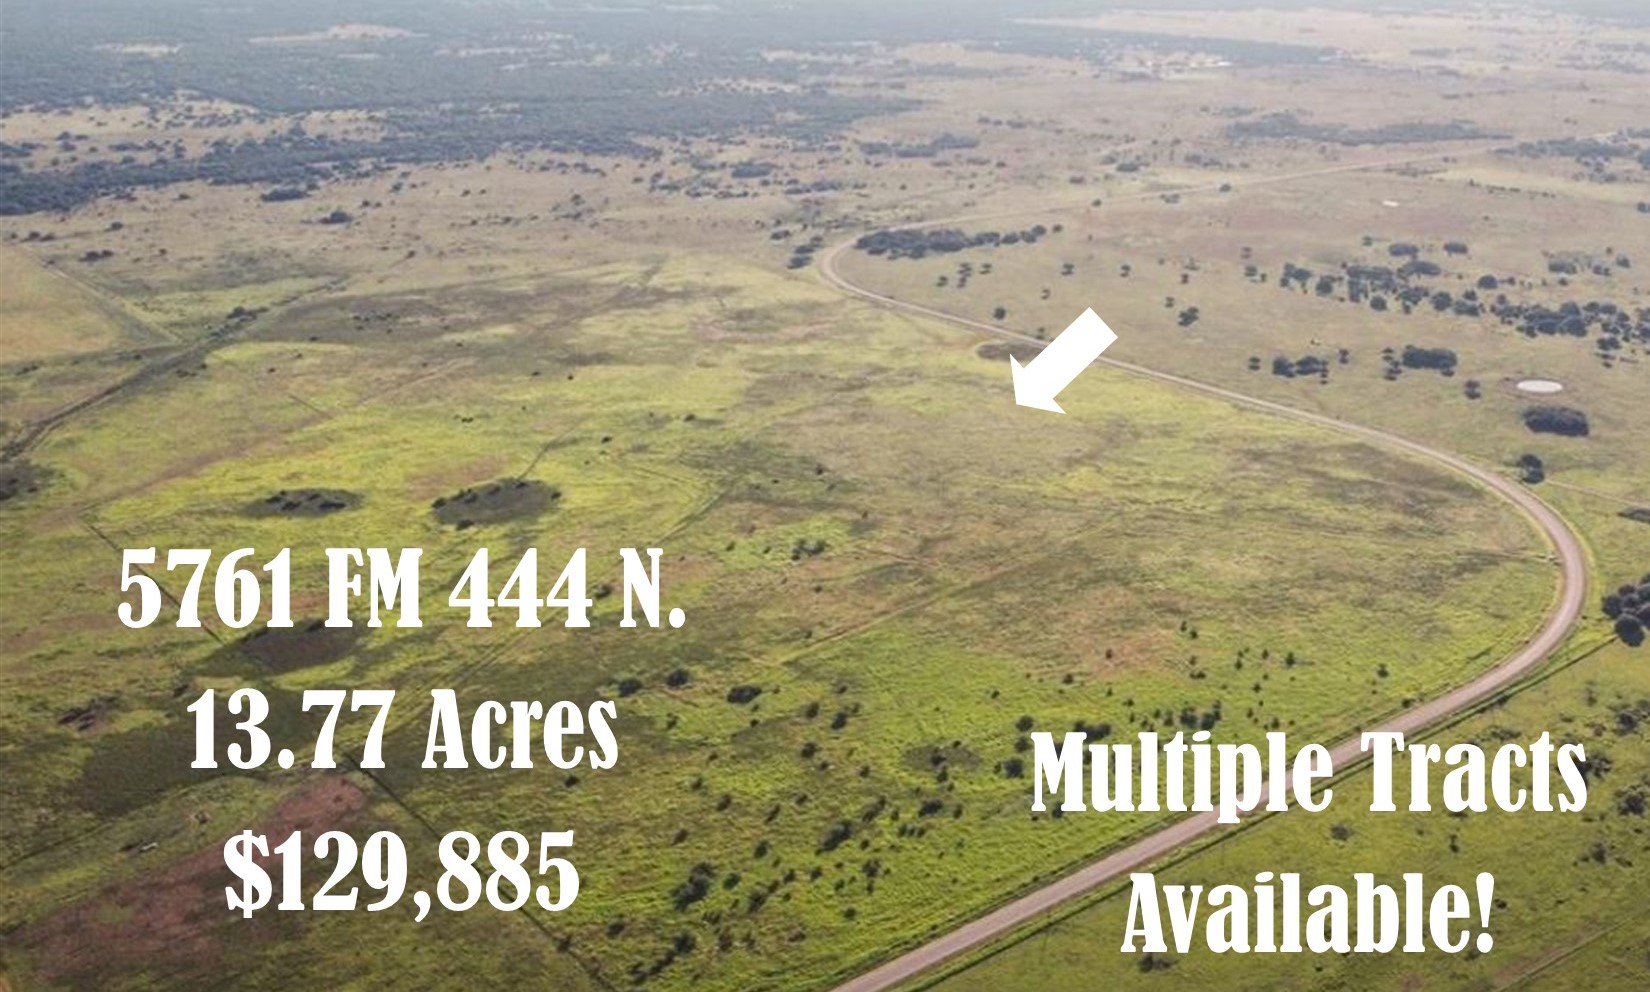 Land for sale on FM 444 in Inez, TX